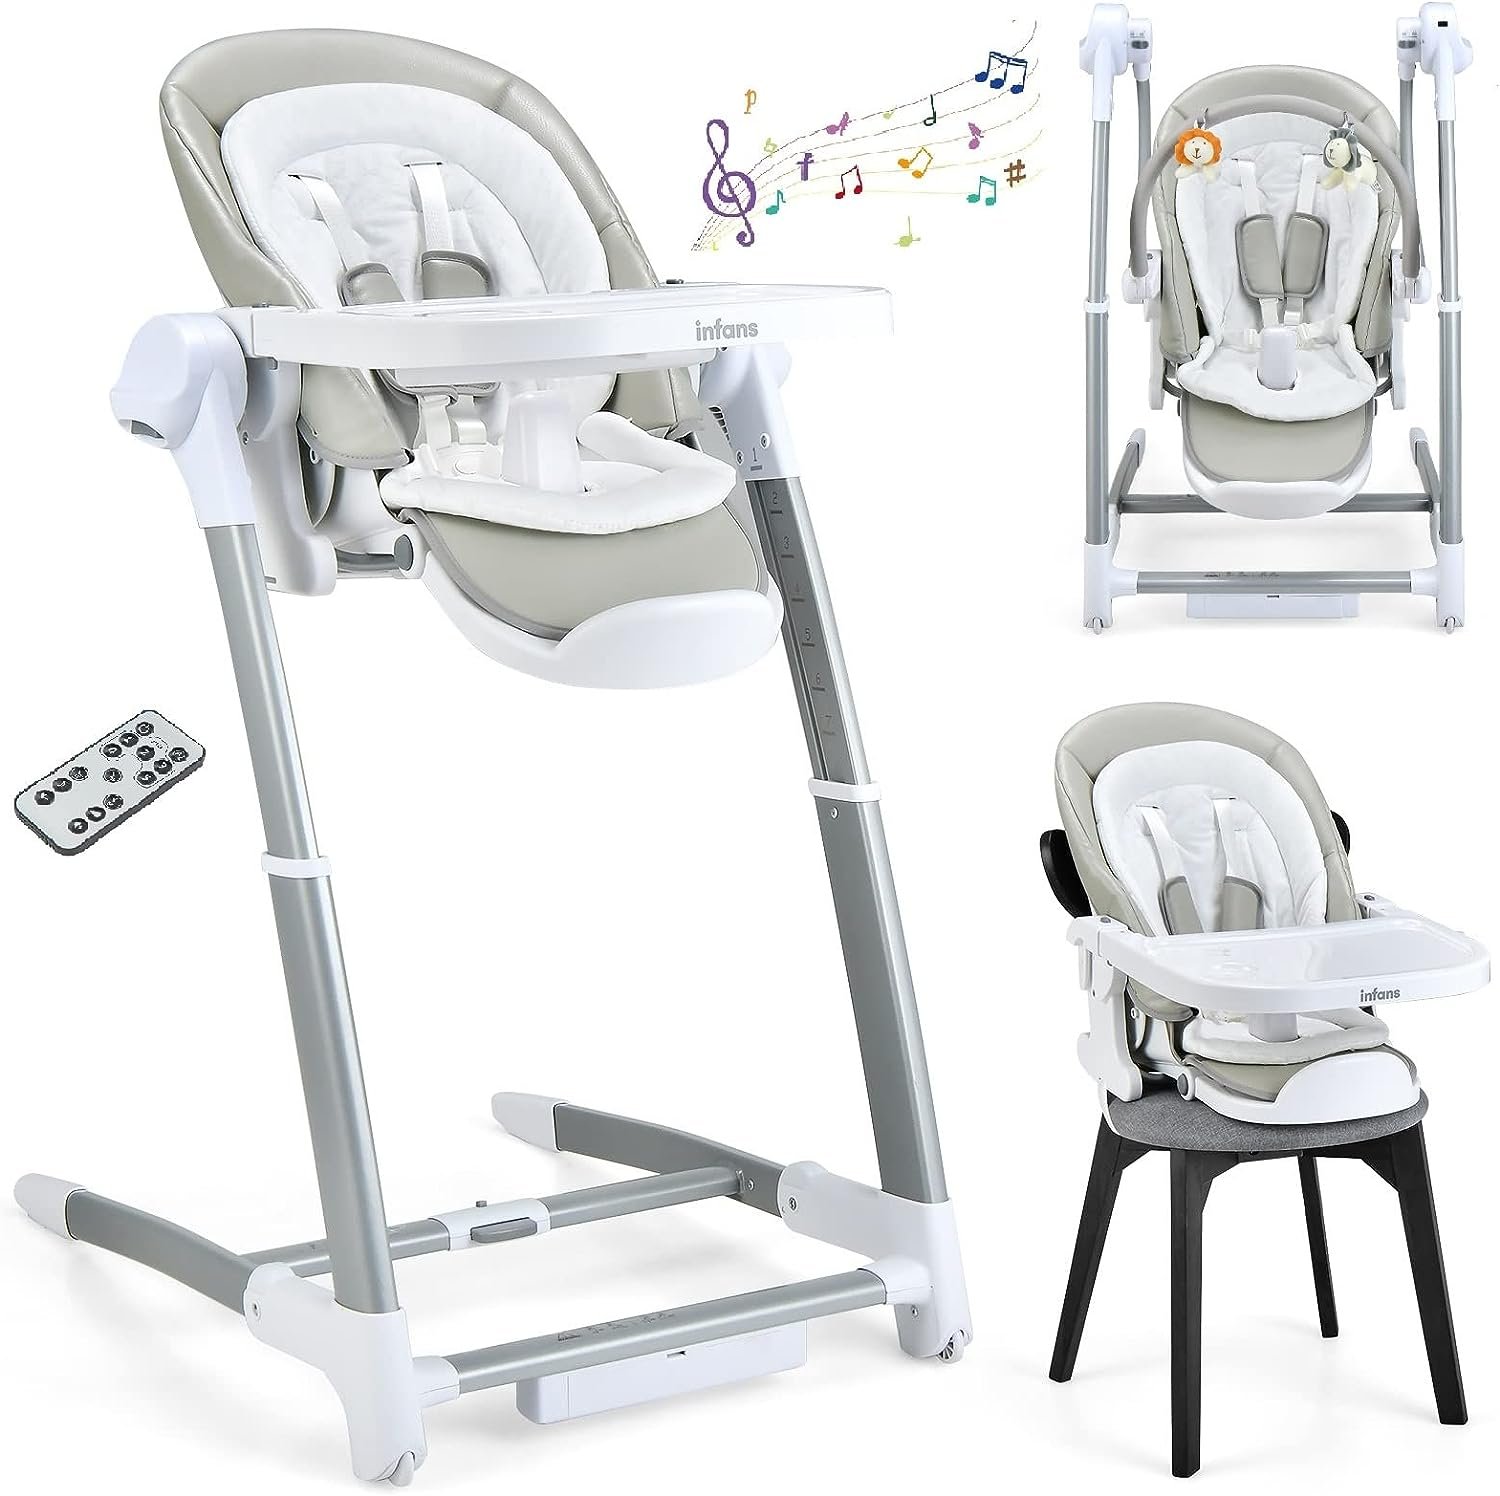 INFANS 3 in 1 Baby High Chair, Electric Baby Swing, Infant Dining Booster Seat with Remote Control One-Hand Removable Tray Double Cushion, Multifunction Highchair for Toddlers